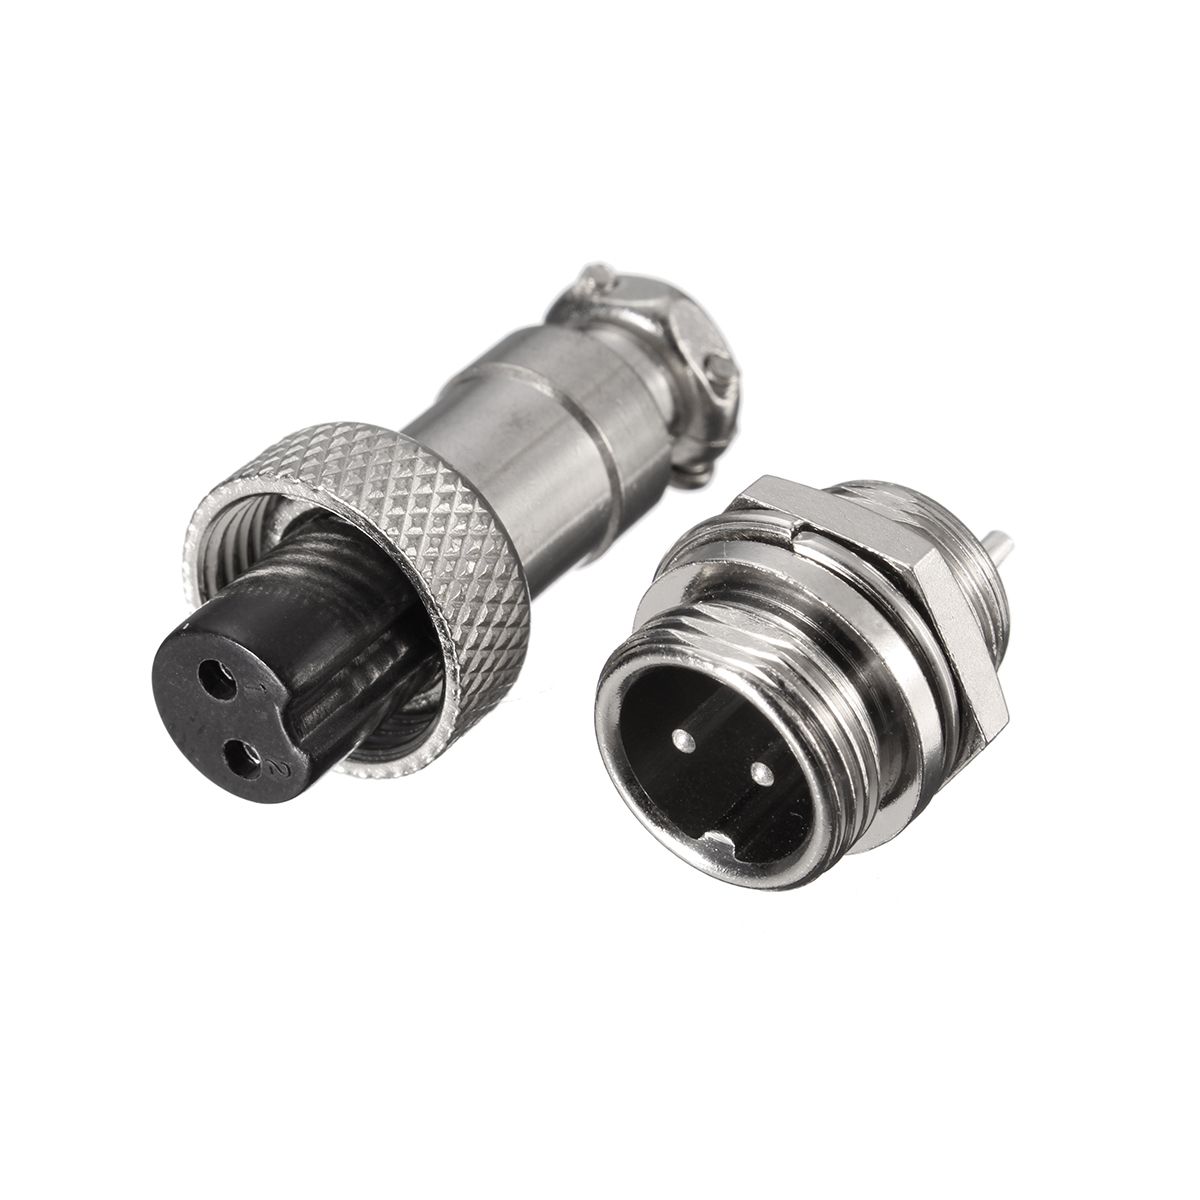 Excellwayreg-GX12-2Pin-Aviation-Plug-MaleFemale-12mm-Wire-Panel-Connector-Adapter-1138924